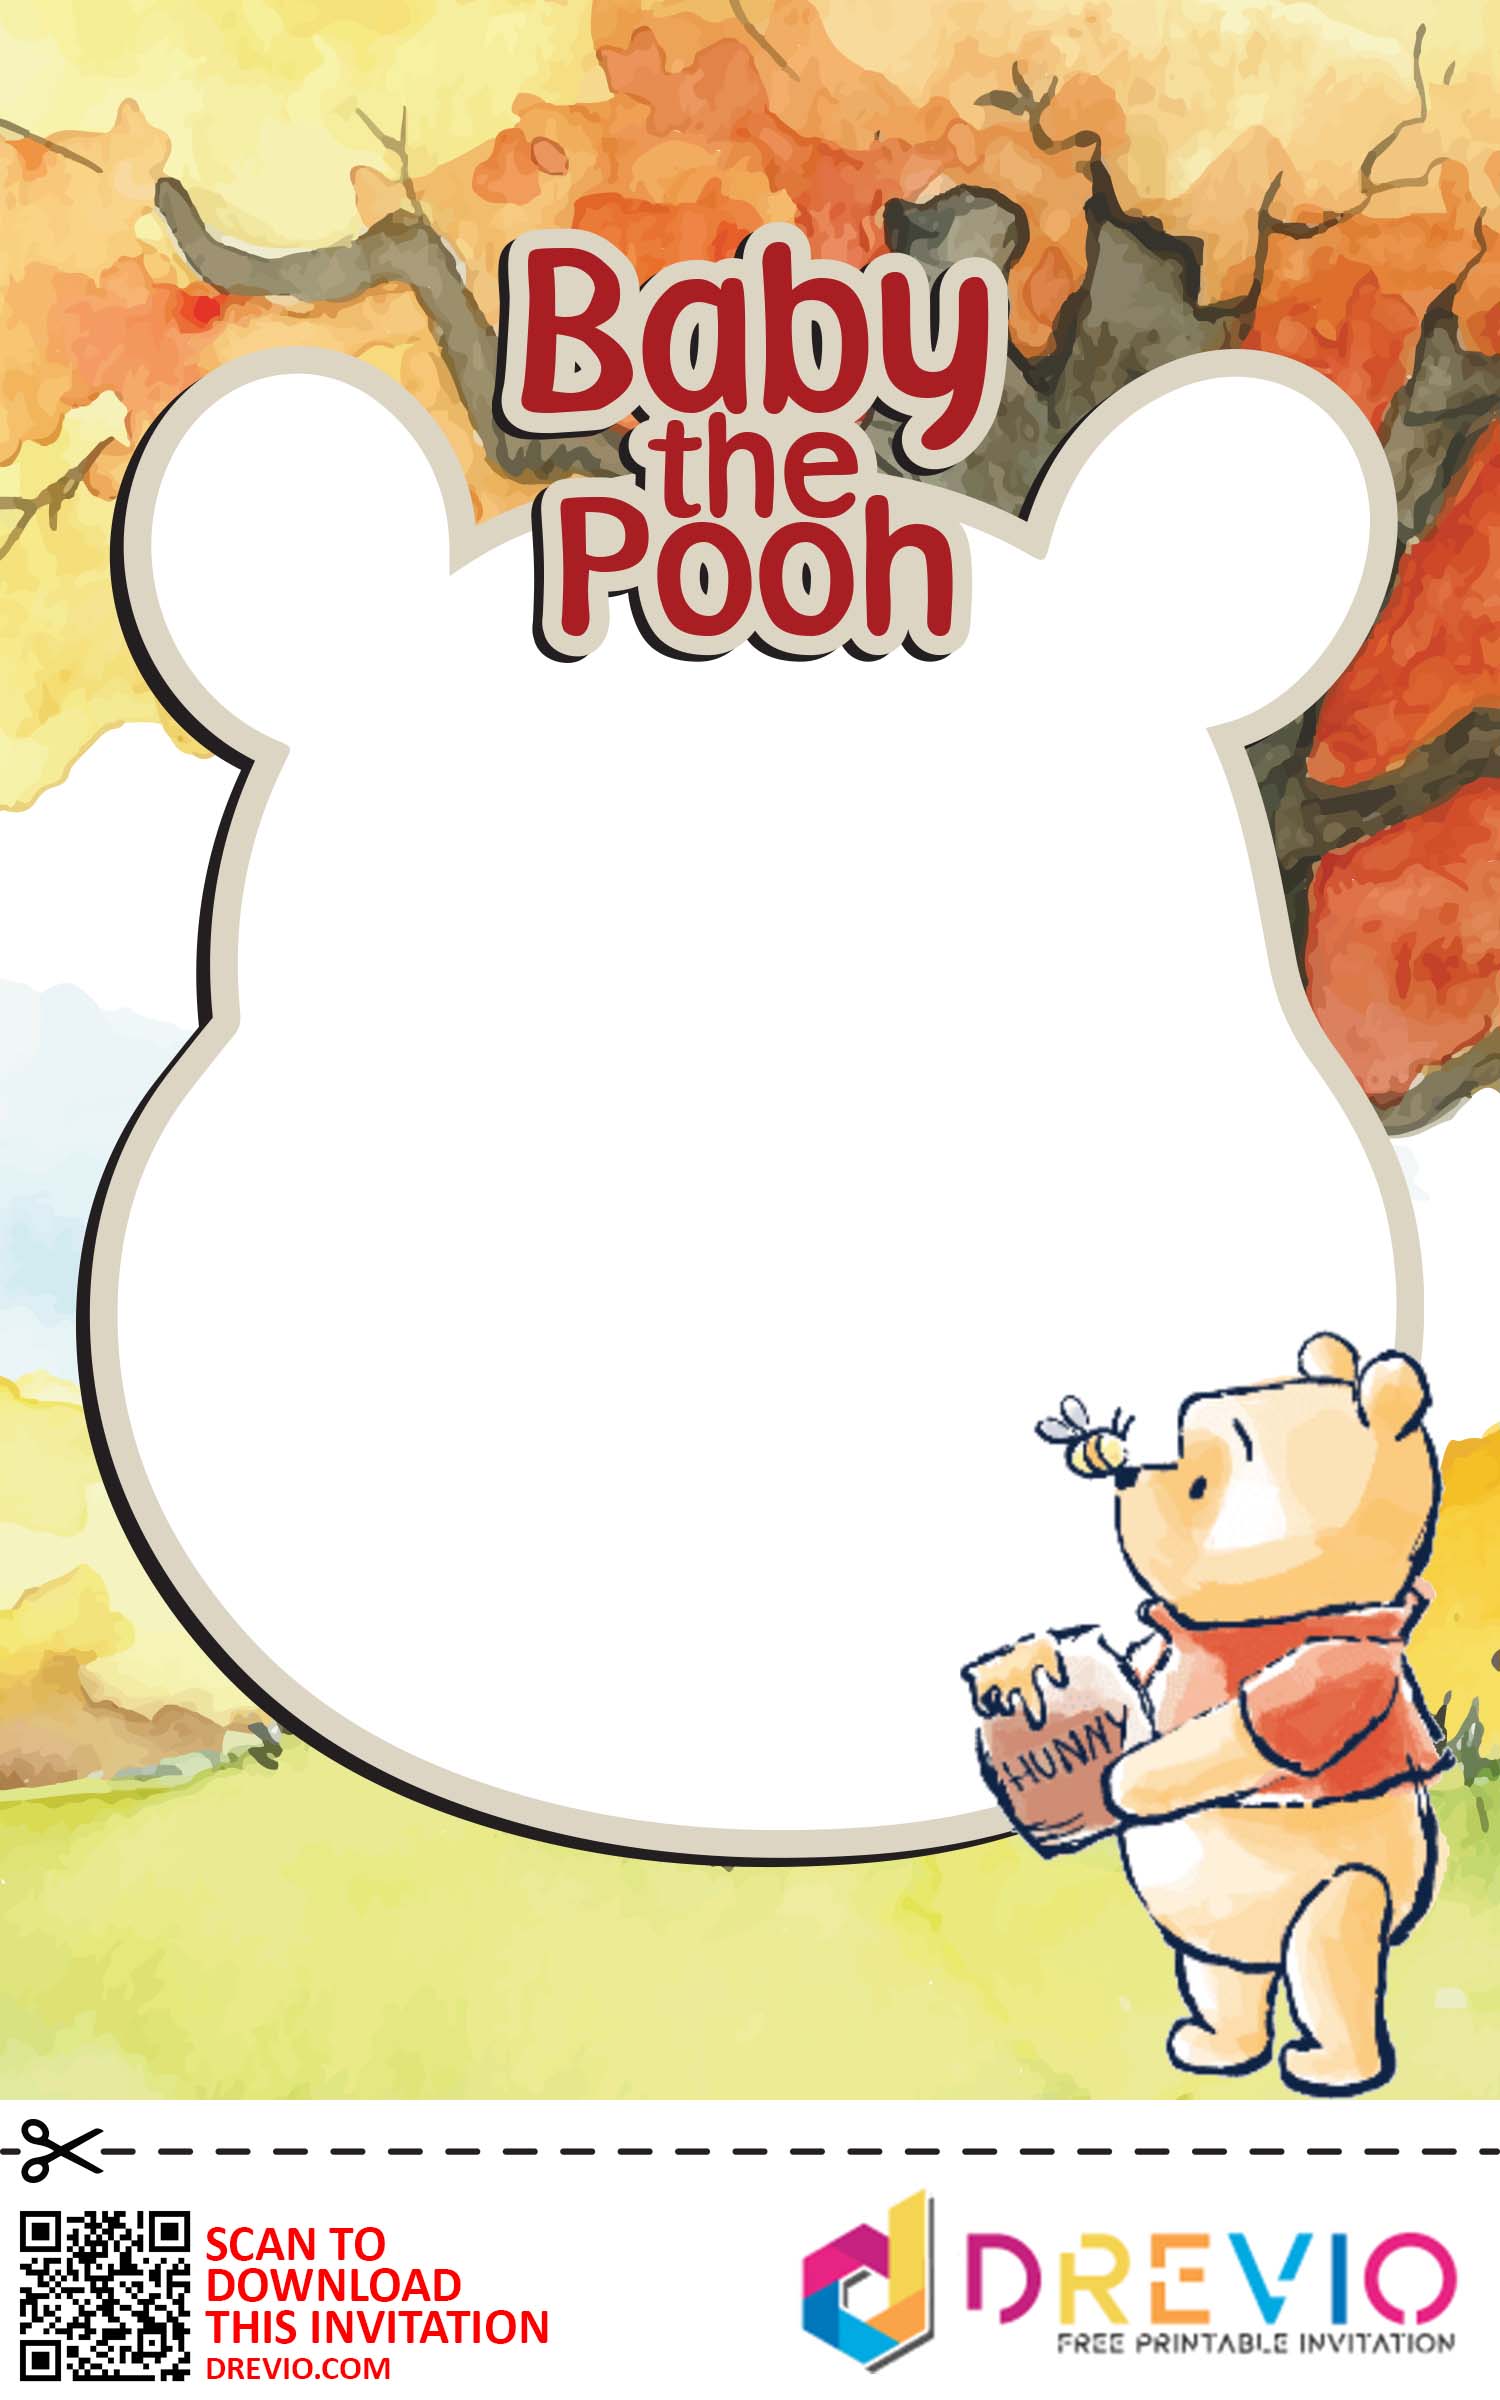 Succulent Winnie the Pooh Baby Shower Invitation Games - Pooh Bear